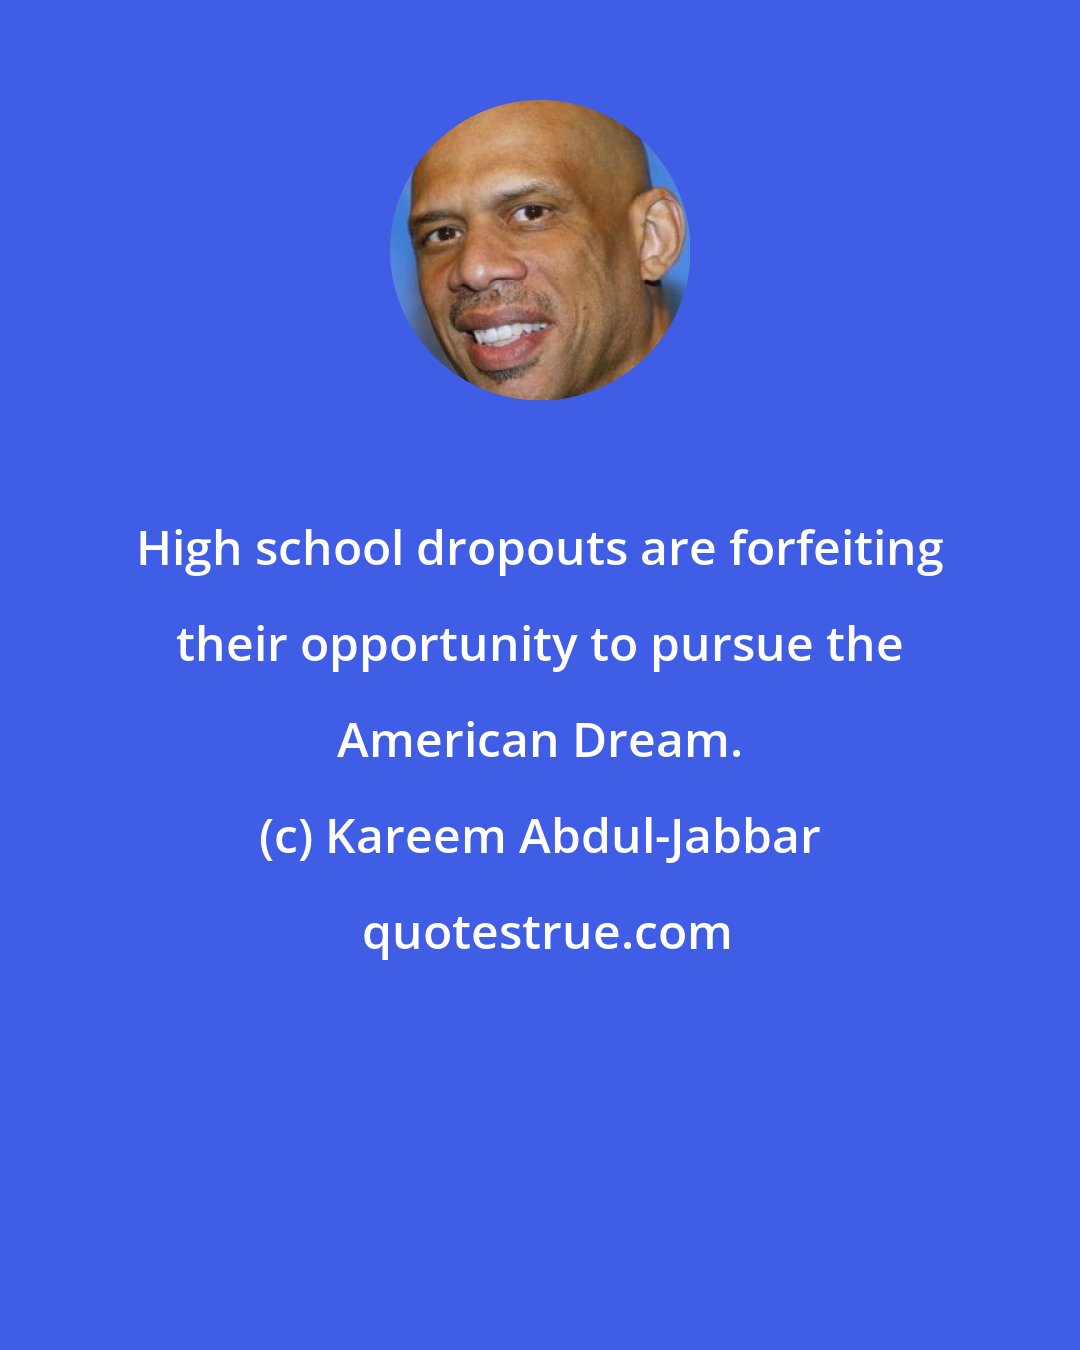 Kareem Abdul-Jabbar: High school dropouts are forfeiting their opportunity to pursue the American Dream.